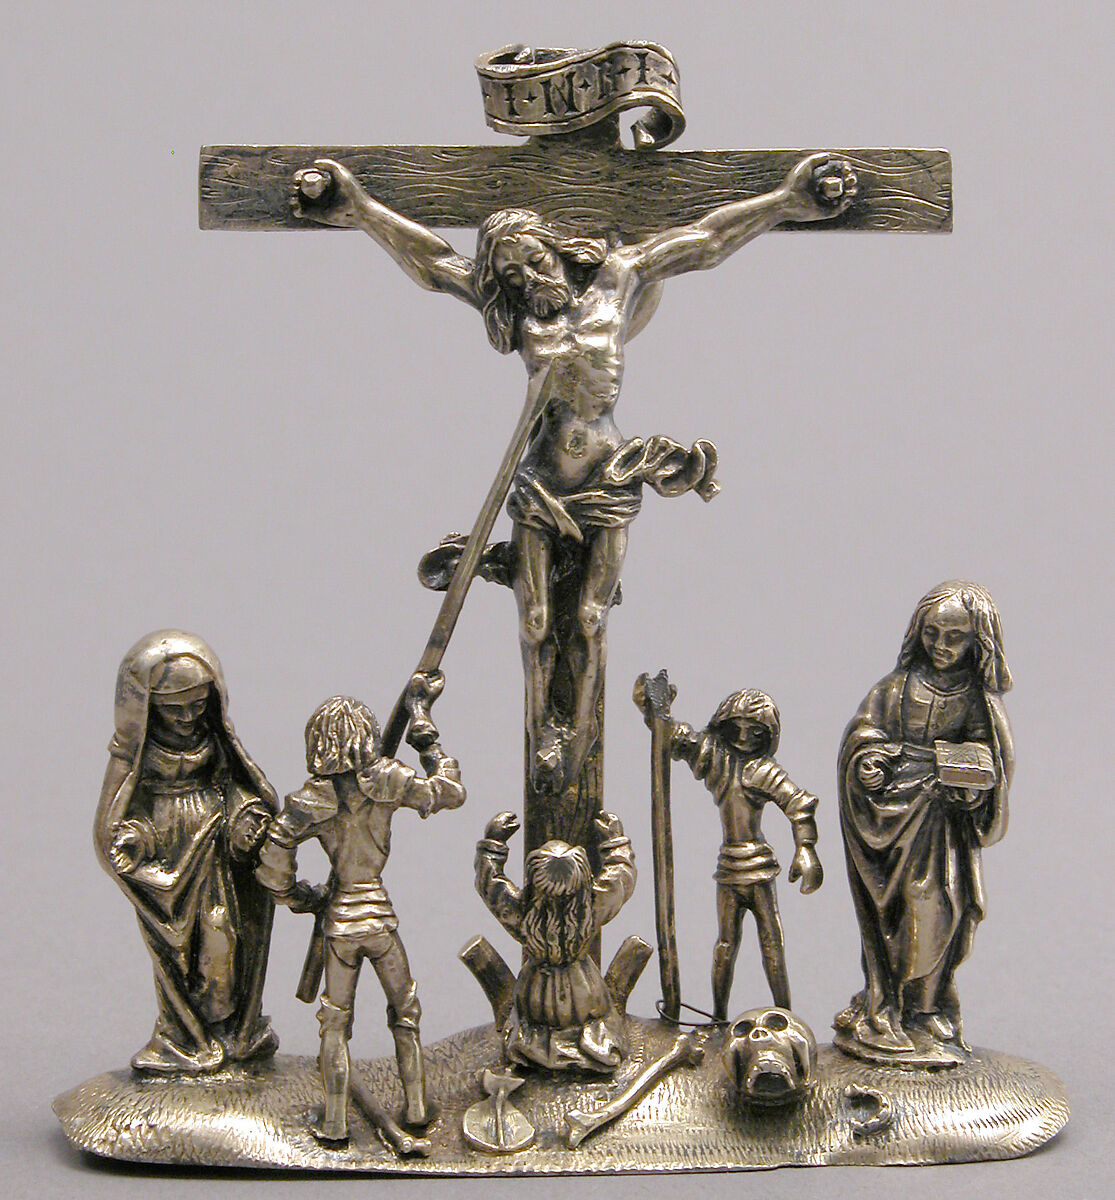 Pendant with the Crucifixion and Attendant Figures, Silver-gilt, German 